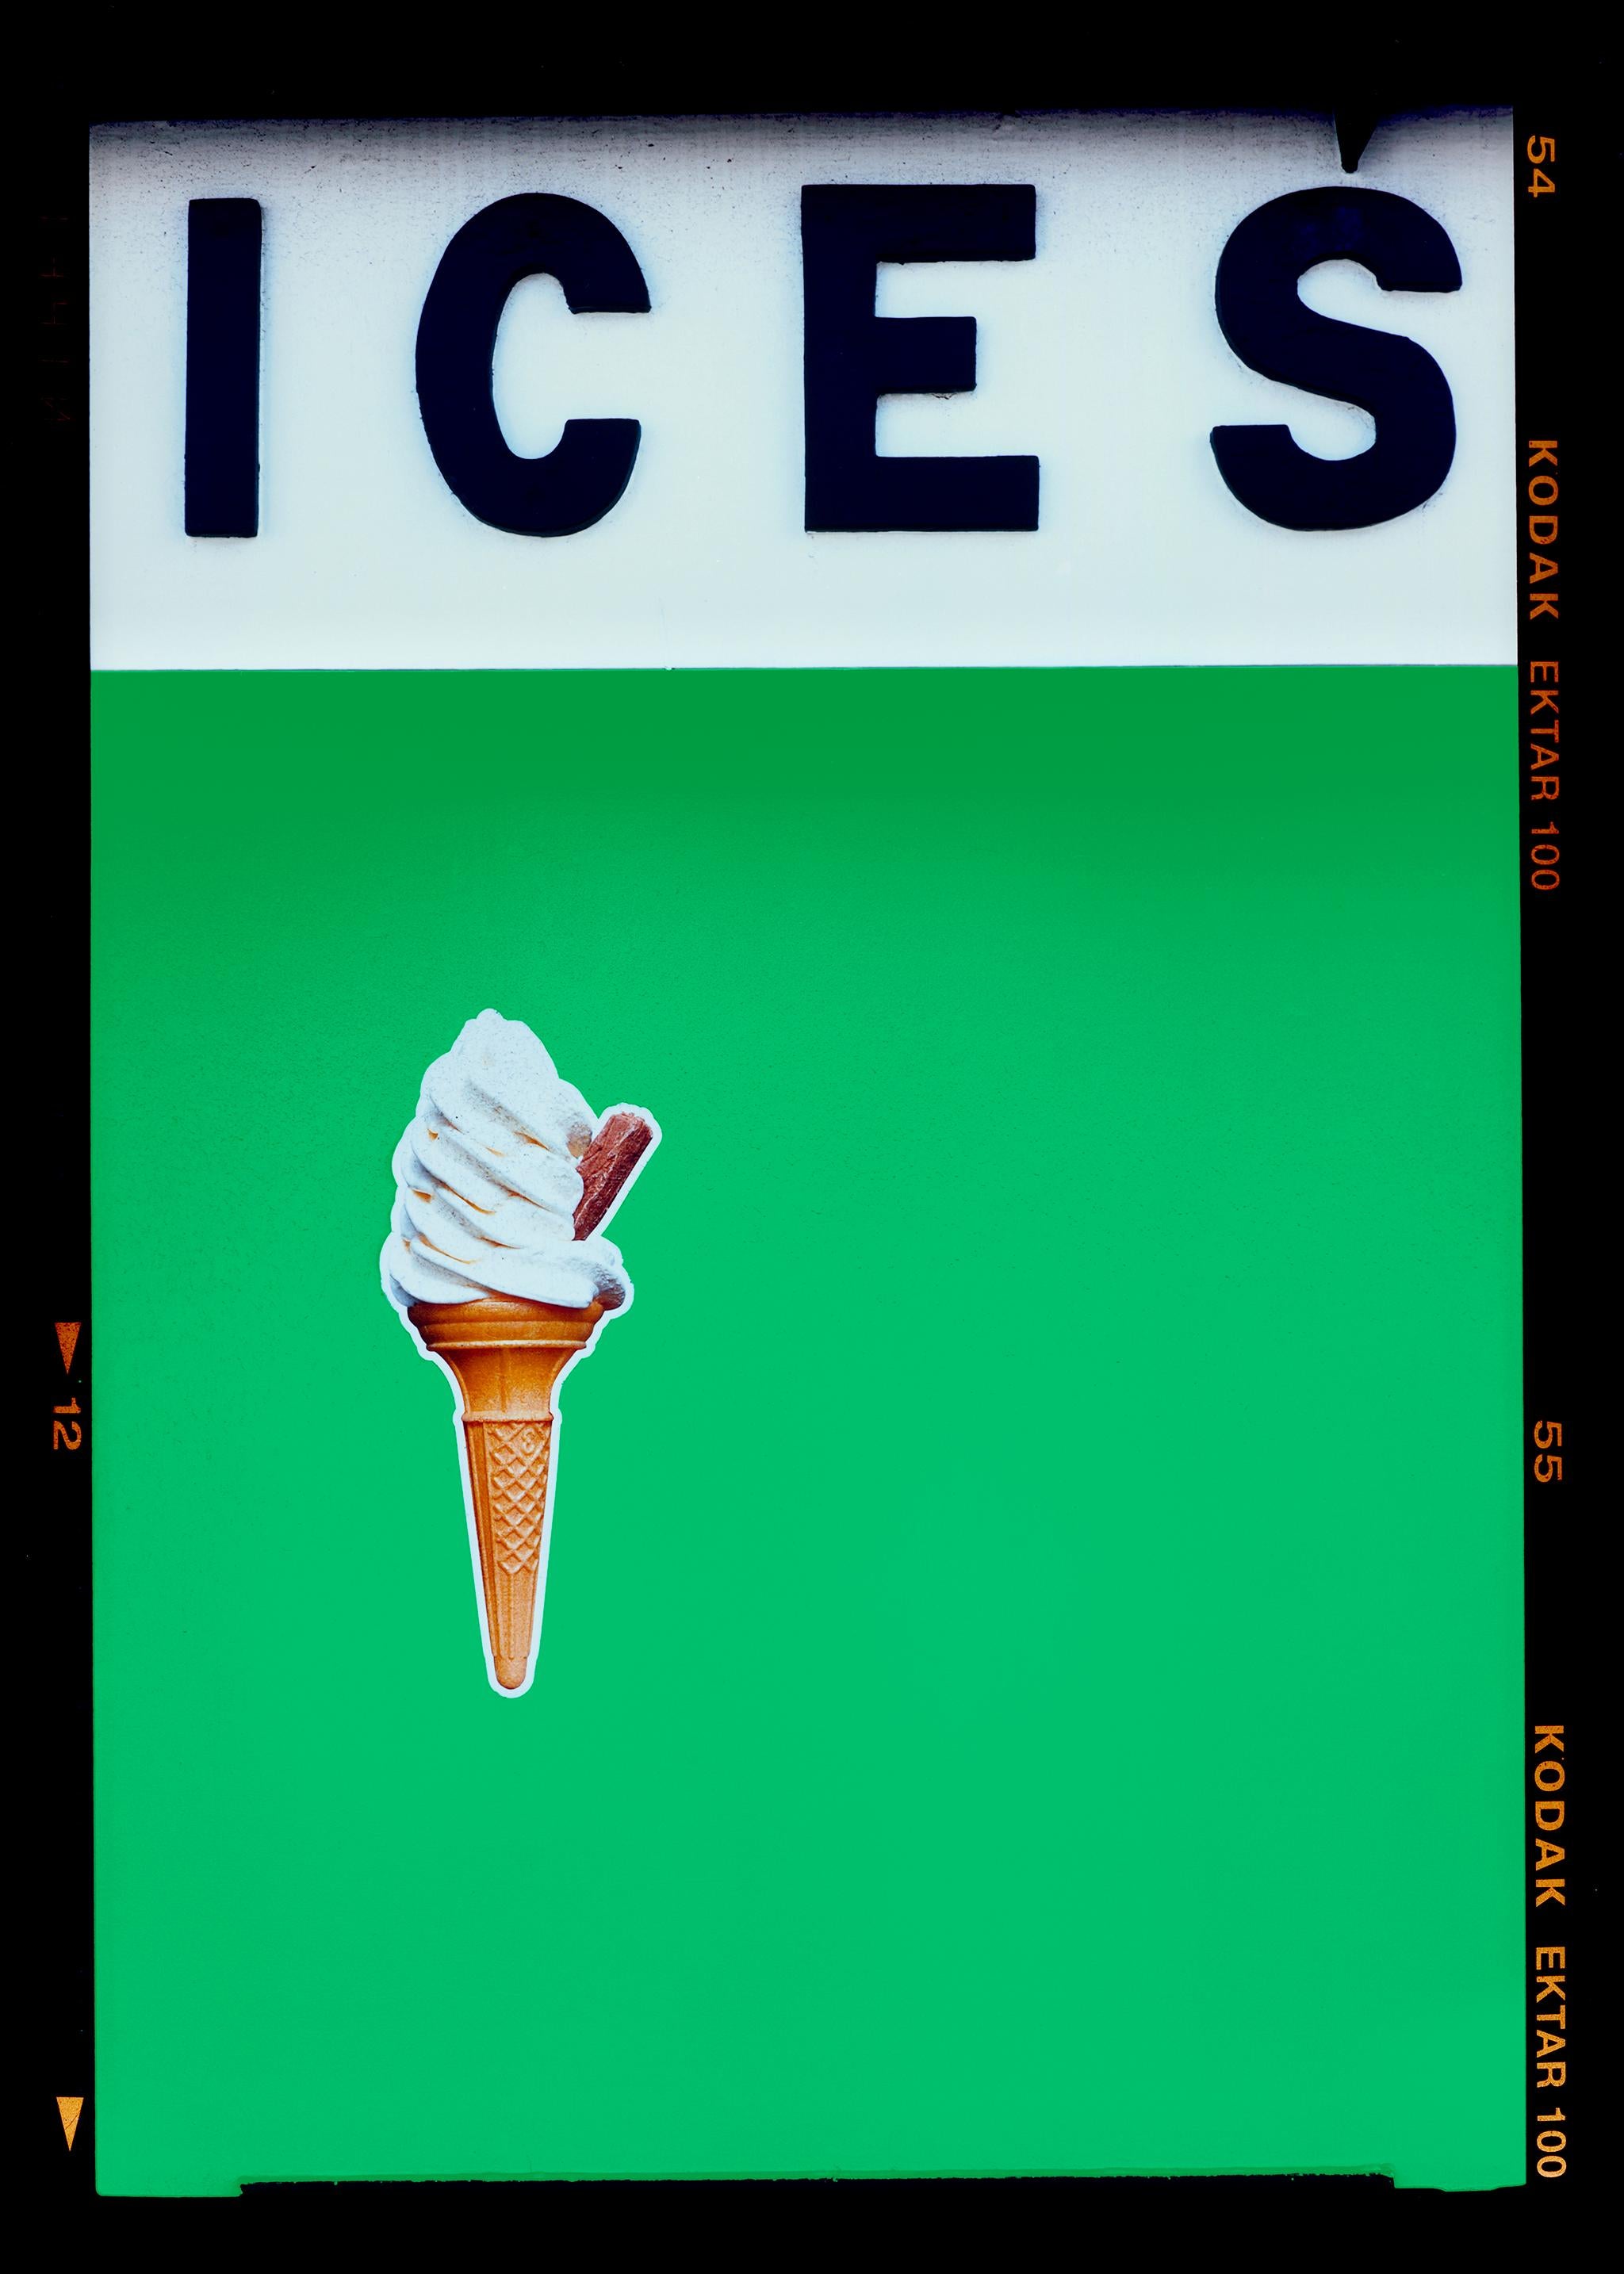 Richard Heeps Print - Ices (Green), Bexhill-on-Sea - British seaside color photography